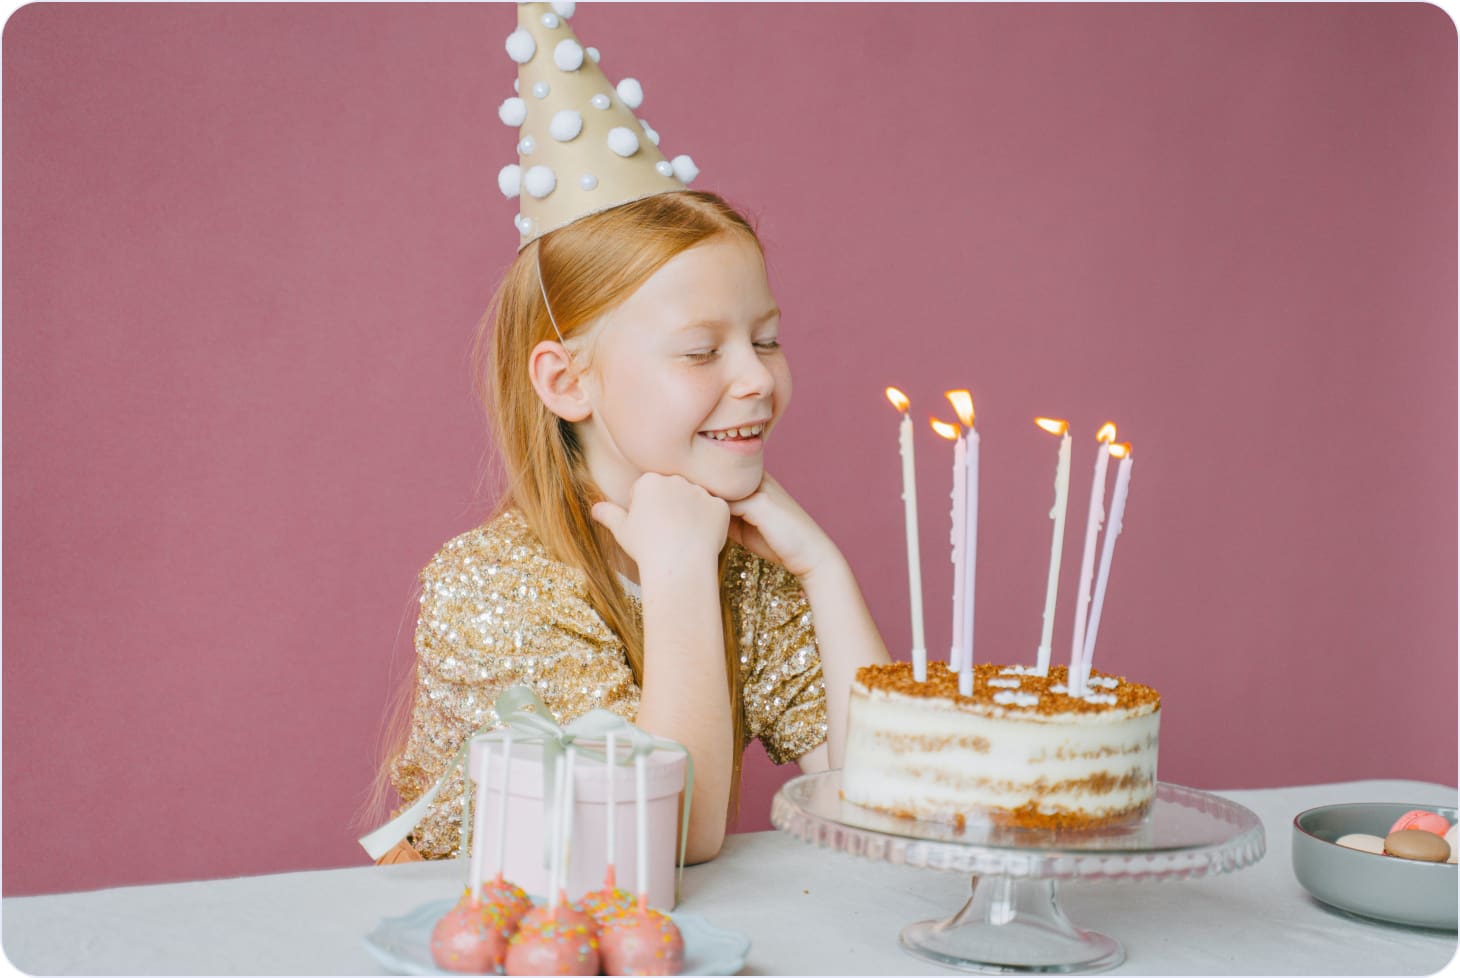 Child with a cake